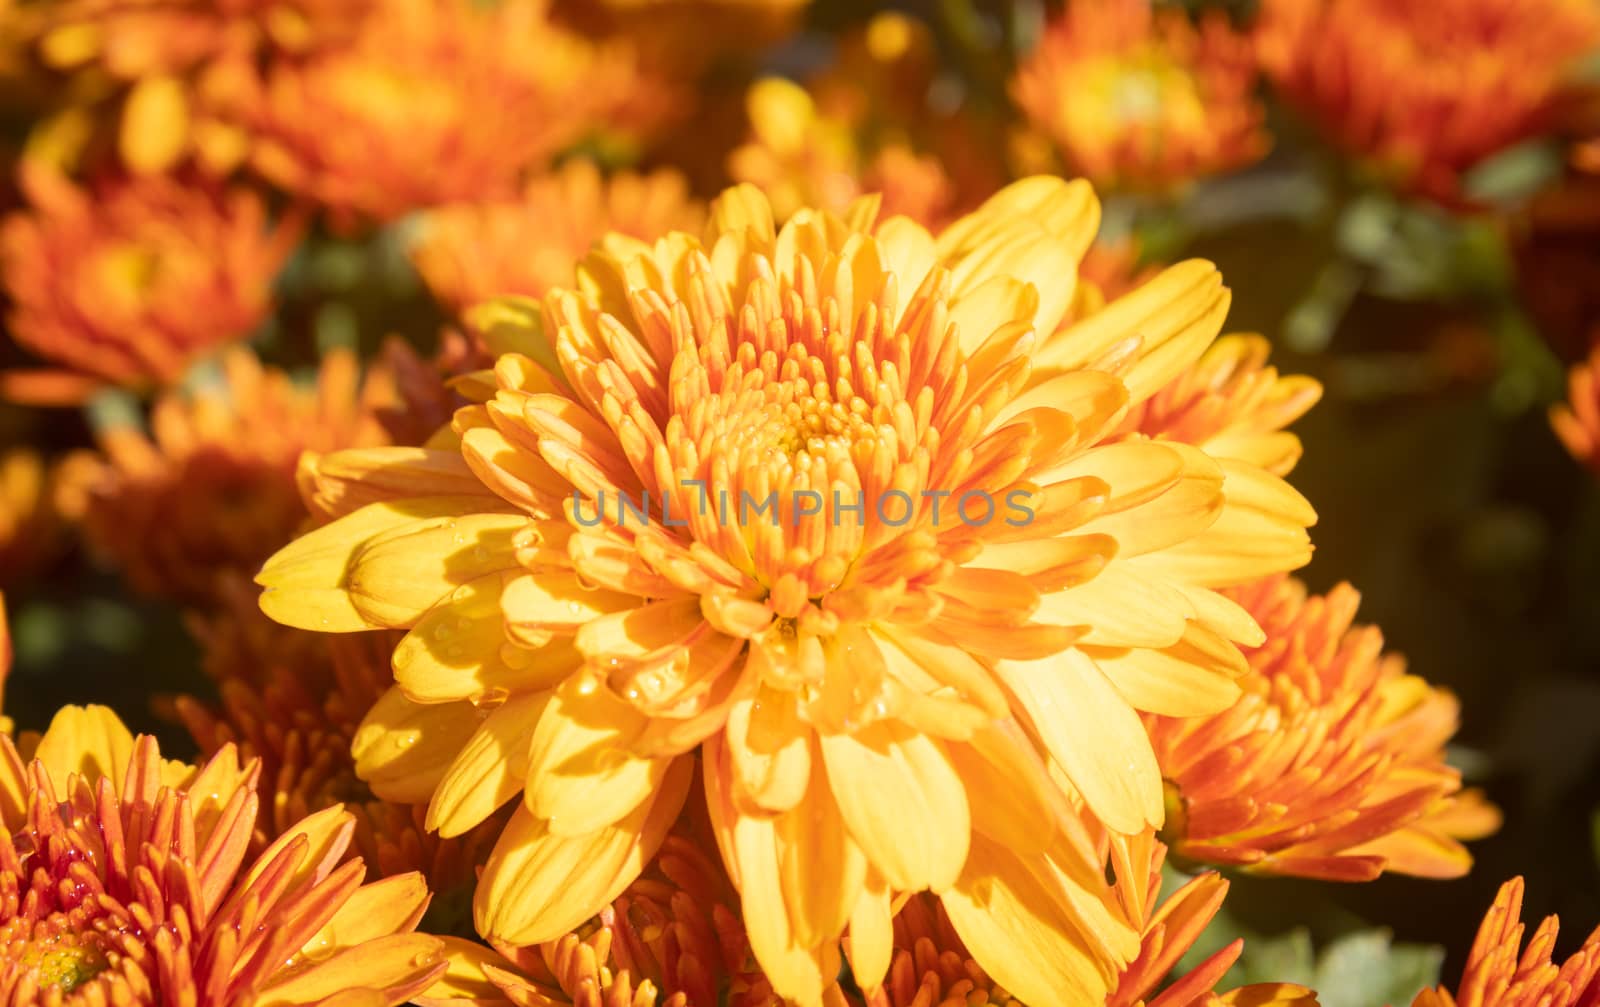 Orange Chrysanthemum or Mums Flowers in Garden with Natural Ligh by steafpong